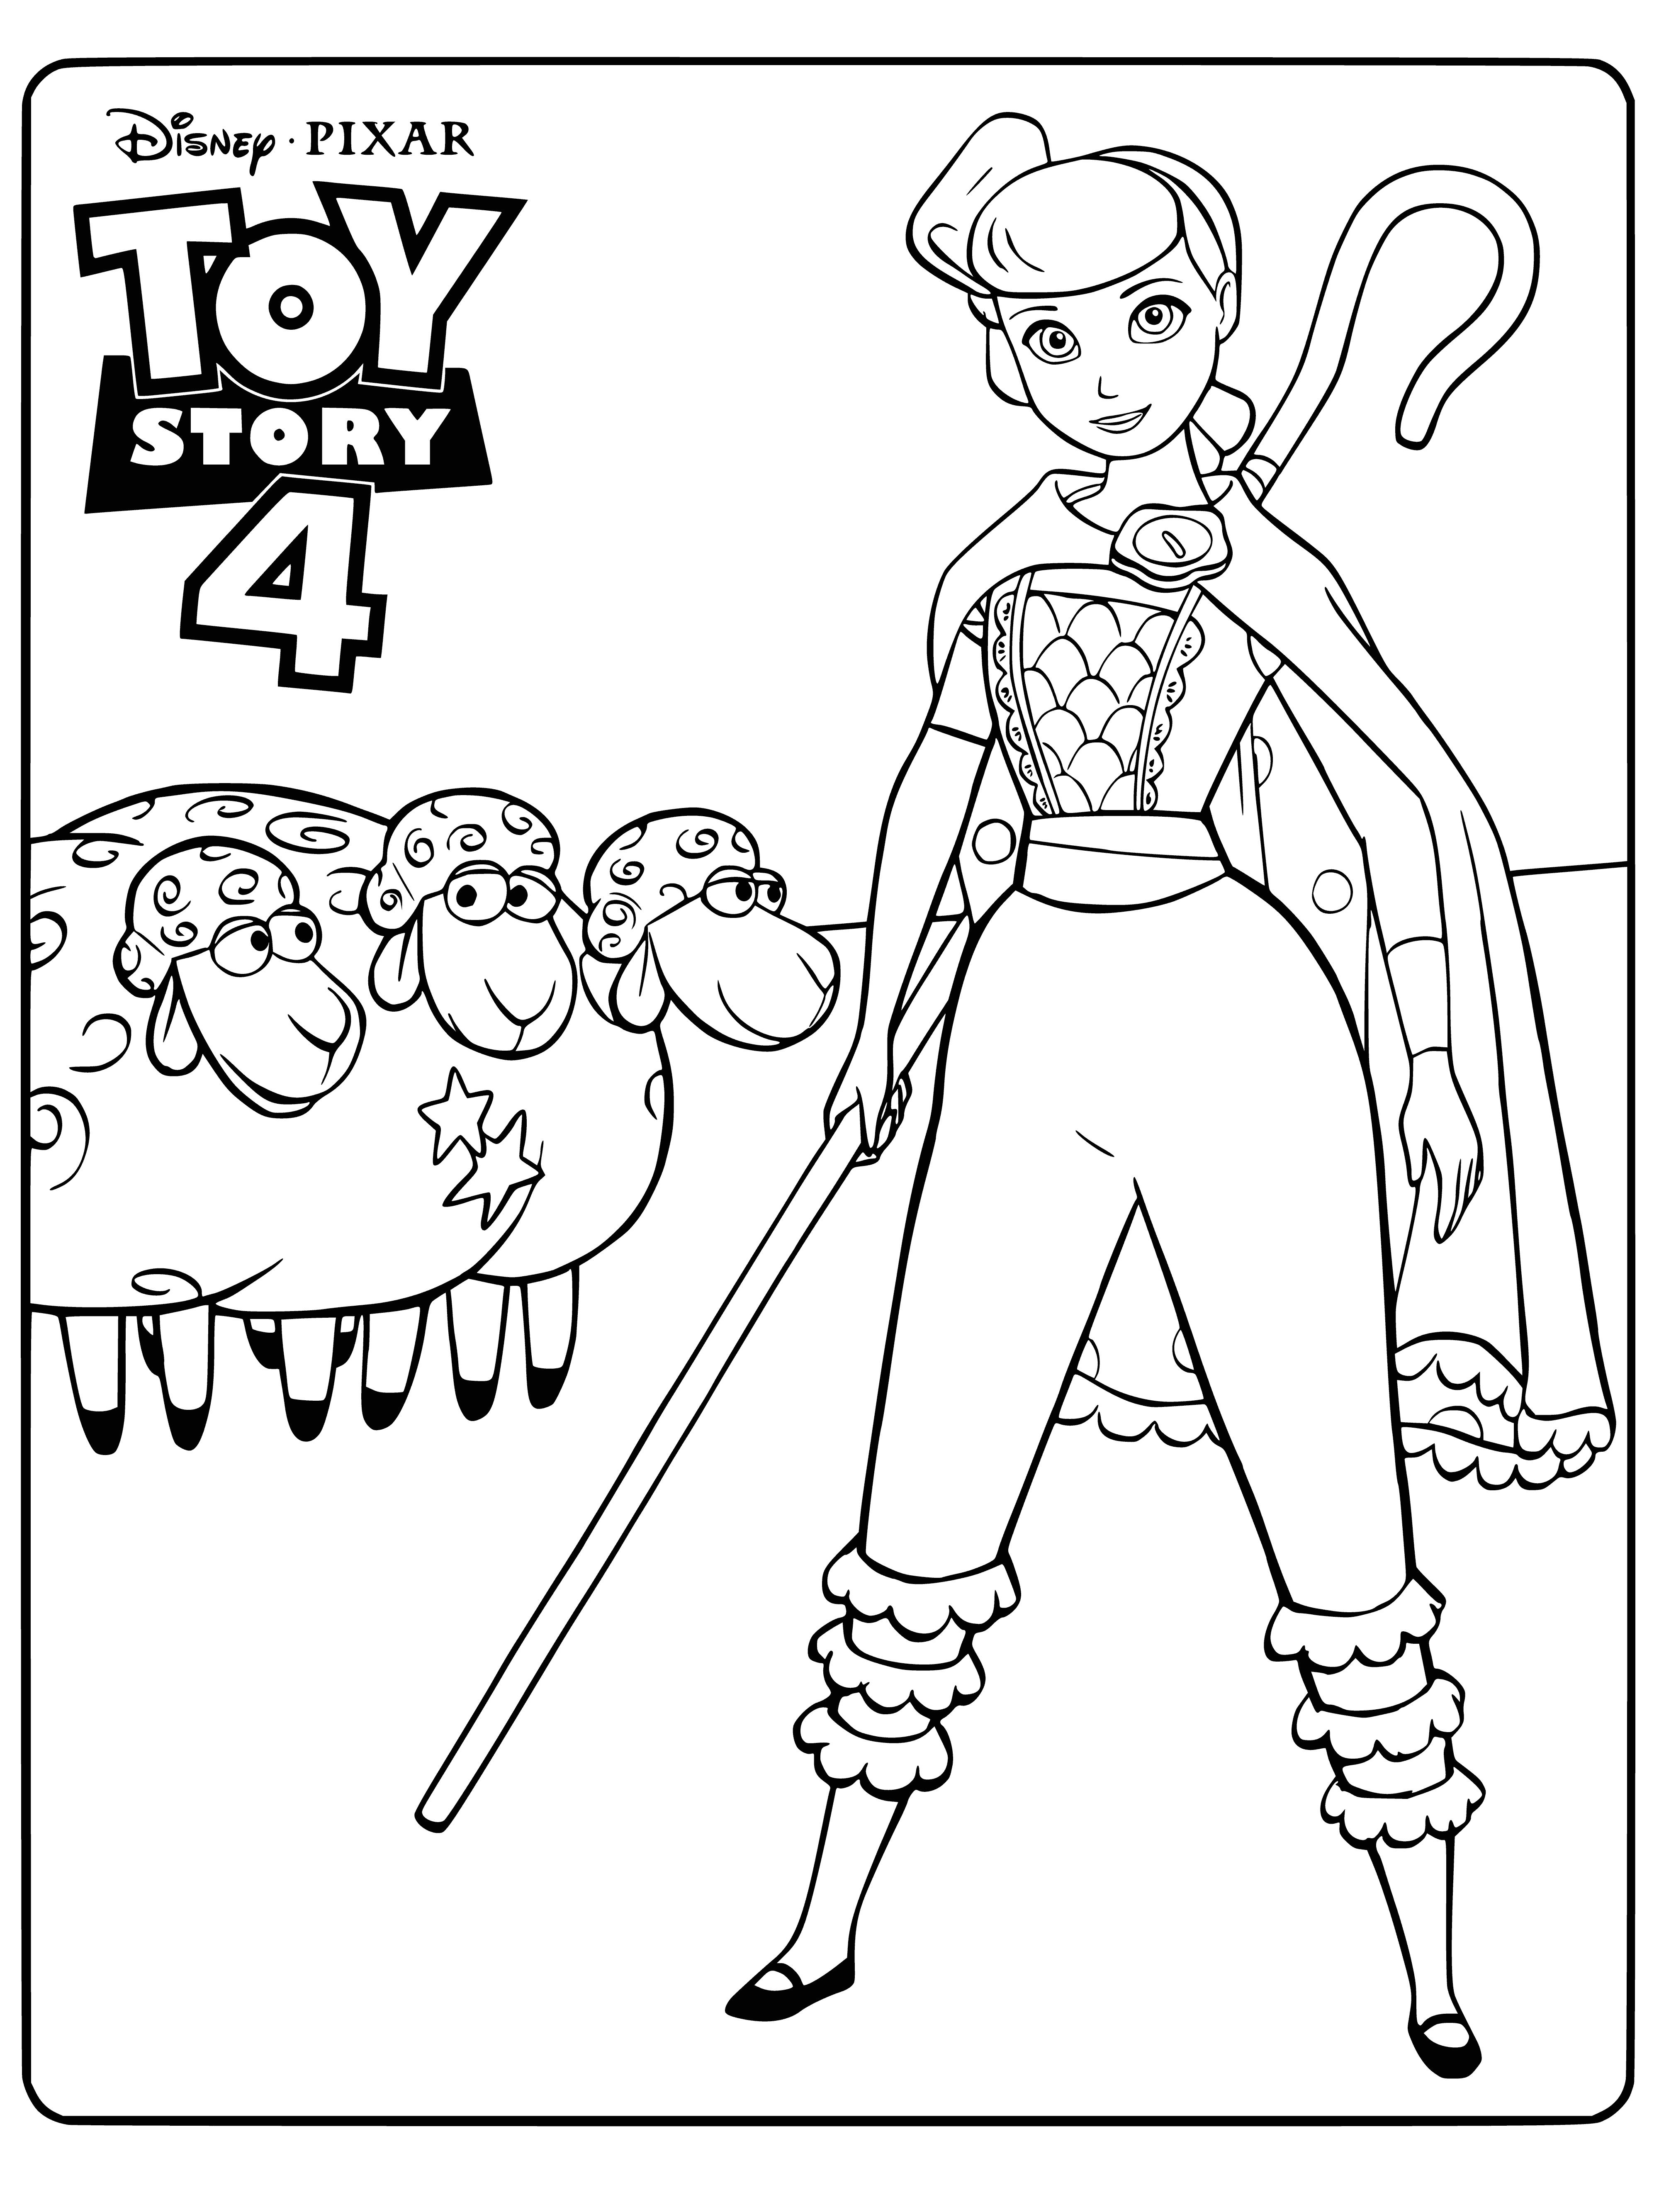 coloring page: Toy shepherdess stands w/ one hand on hip, other extended holding staff. Wears long dress w/ white flowers on blue background. Smiling with head slightly tilted.